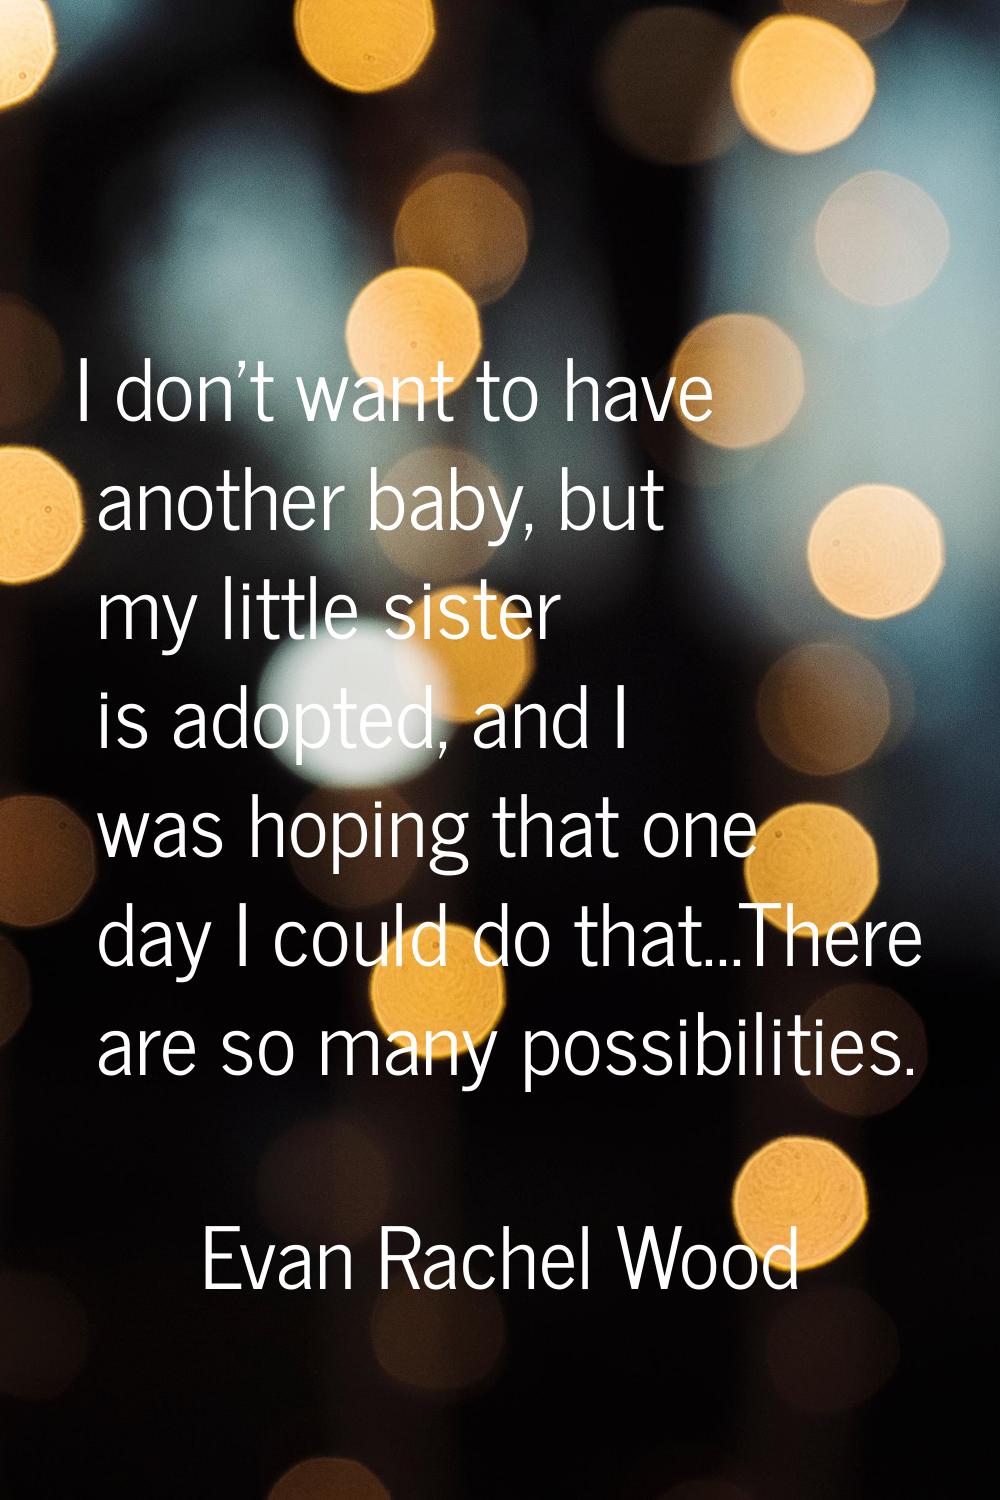 I don't want to have another baby, but my little sister is adopted, and I was hoping that one day I